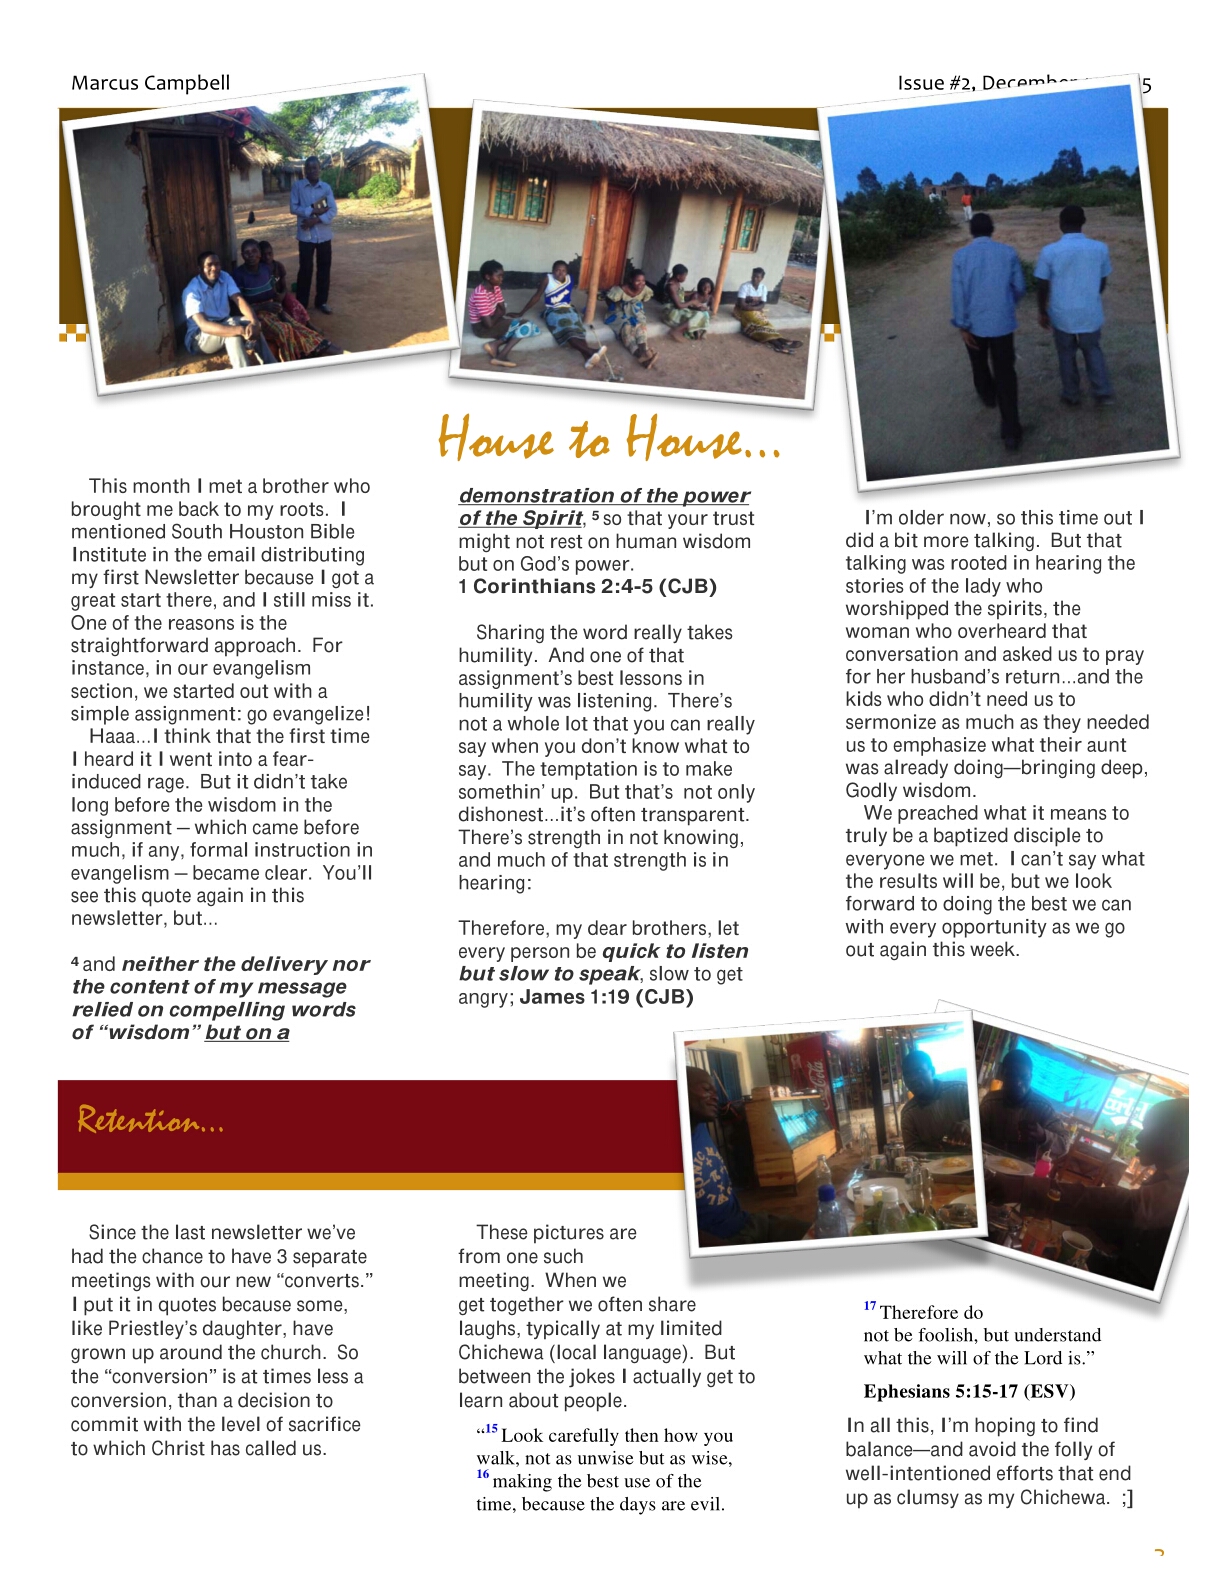 mission-malawi-newsletter-issue-2-date-12-14-15-smaller-file [3]